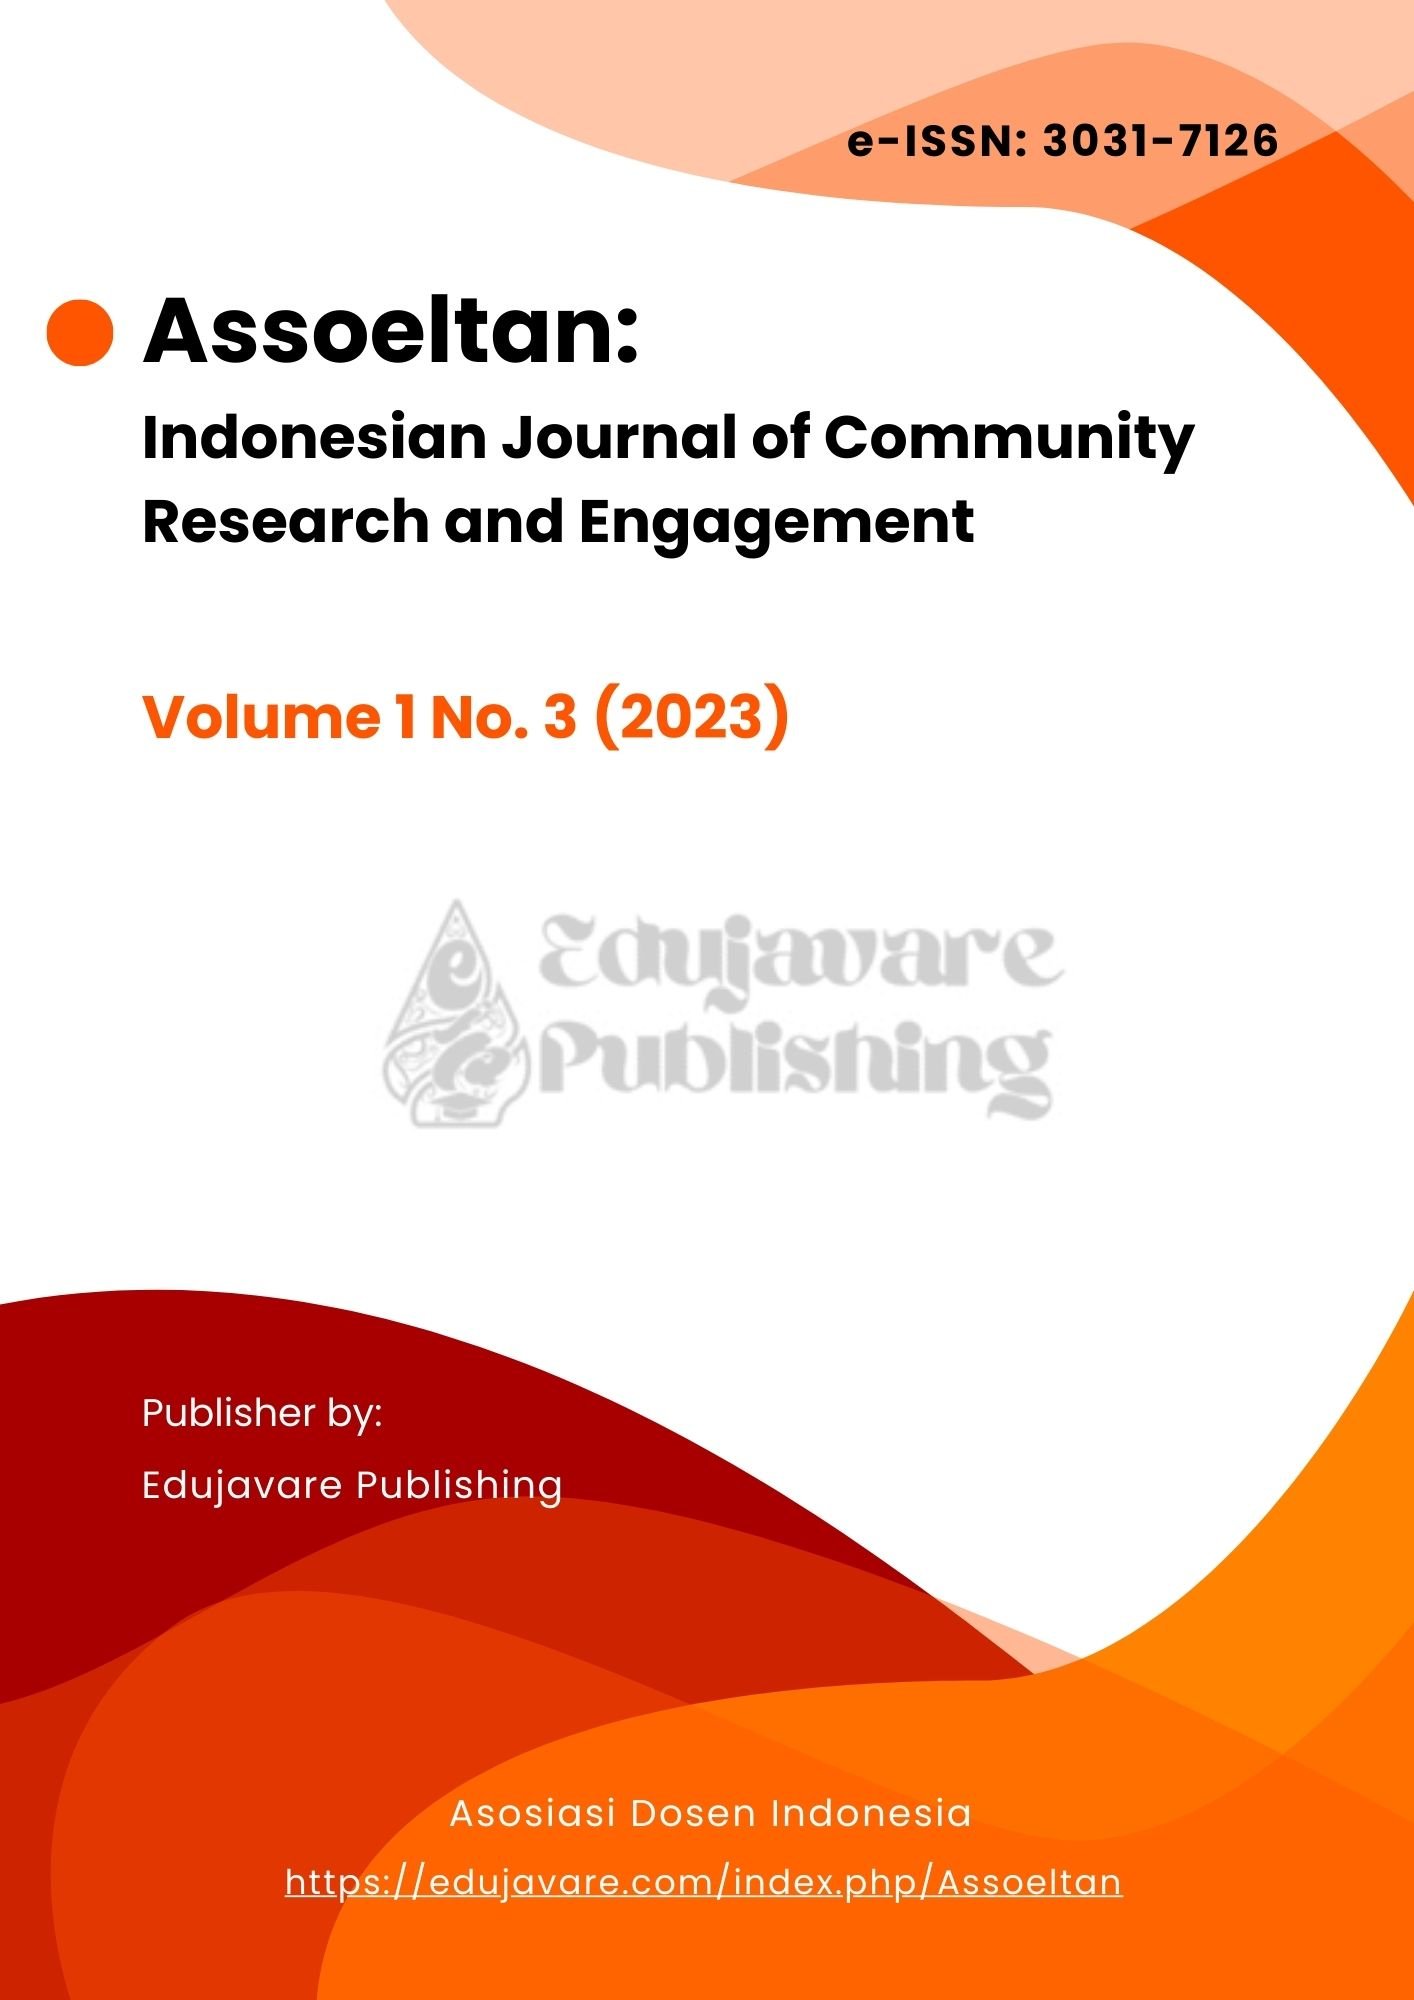 					View Vol. 1 No. 3 (2023): Indonesian Journal of Community Research and Engagement
				